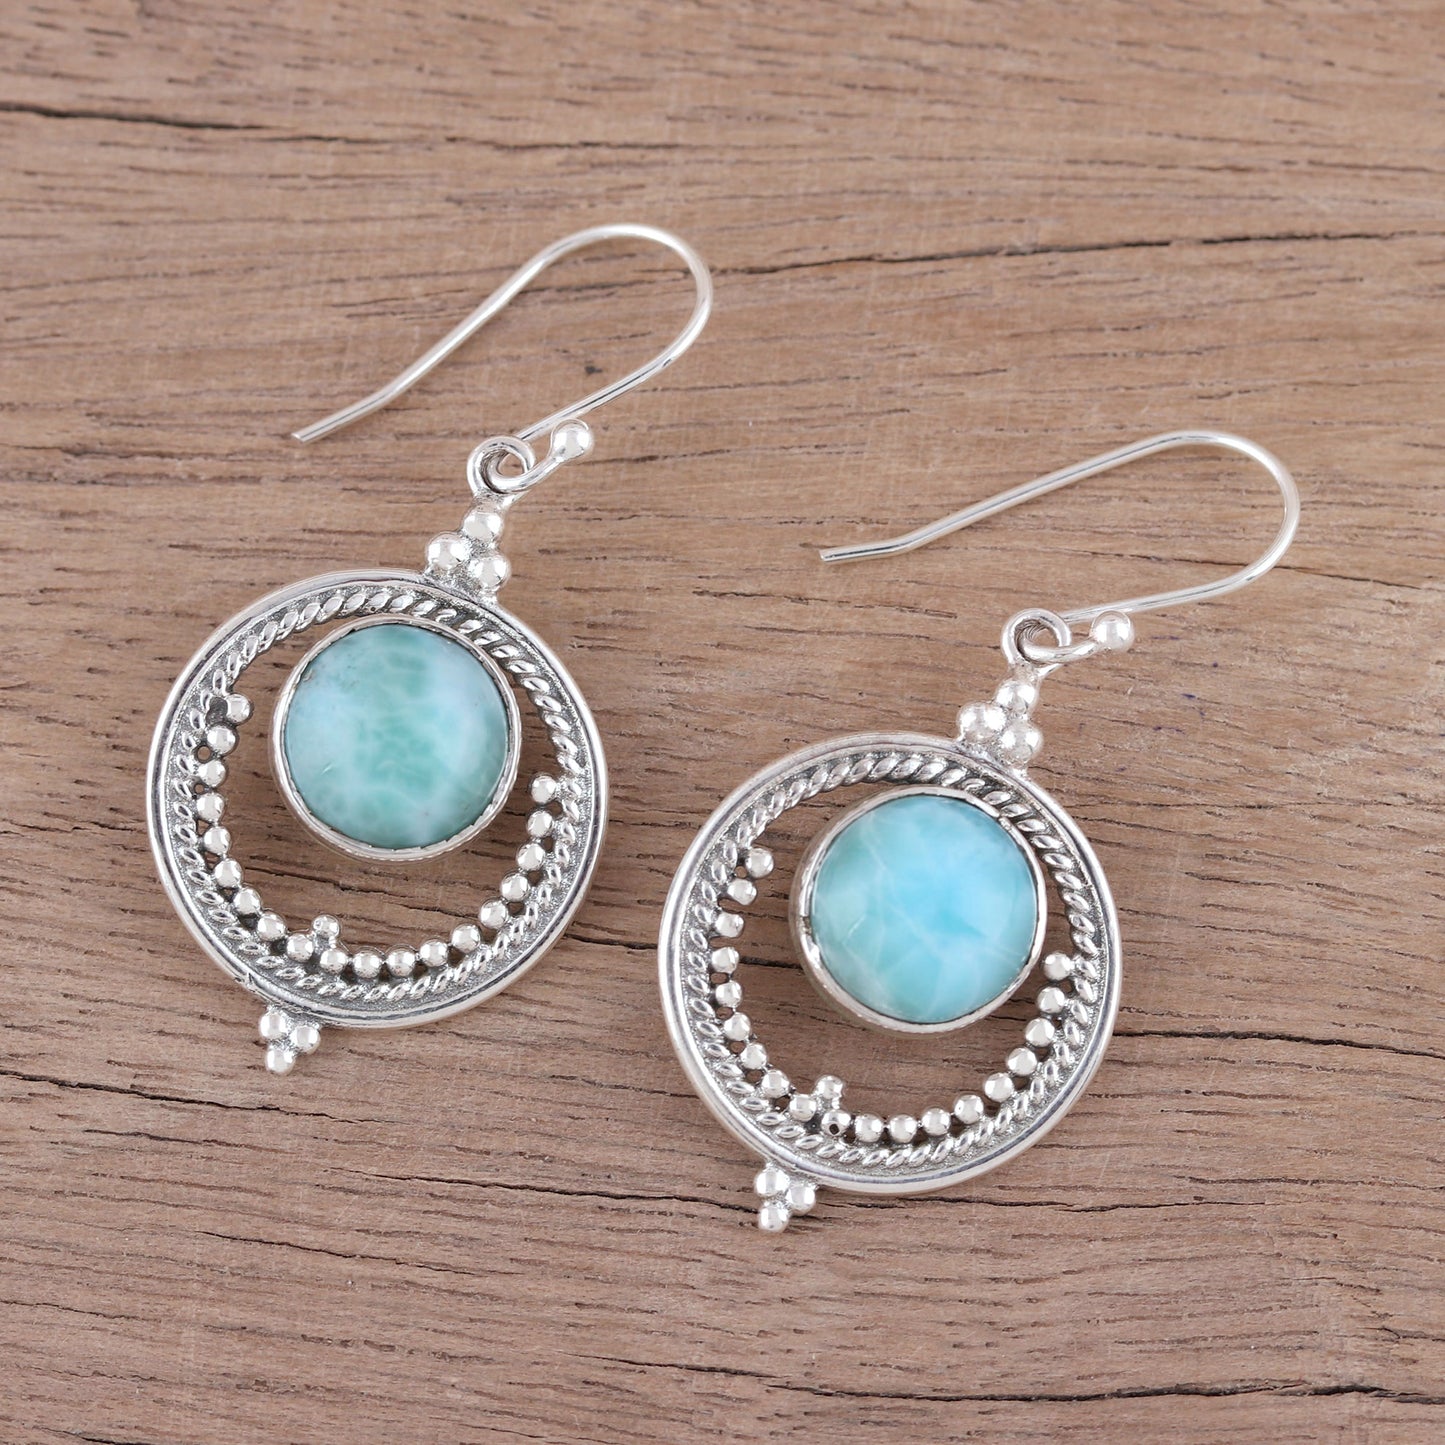 Lunar Delight Larimar and Sterling Silver Dangle Earrings from India